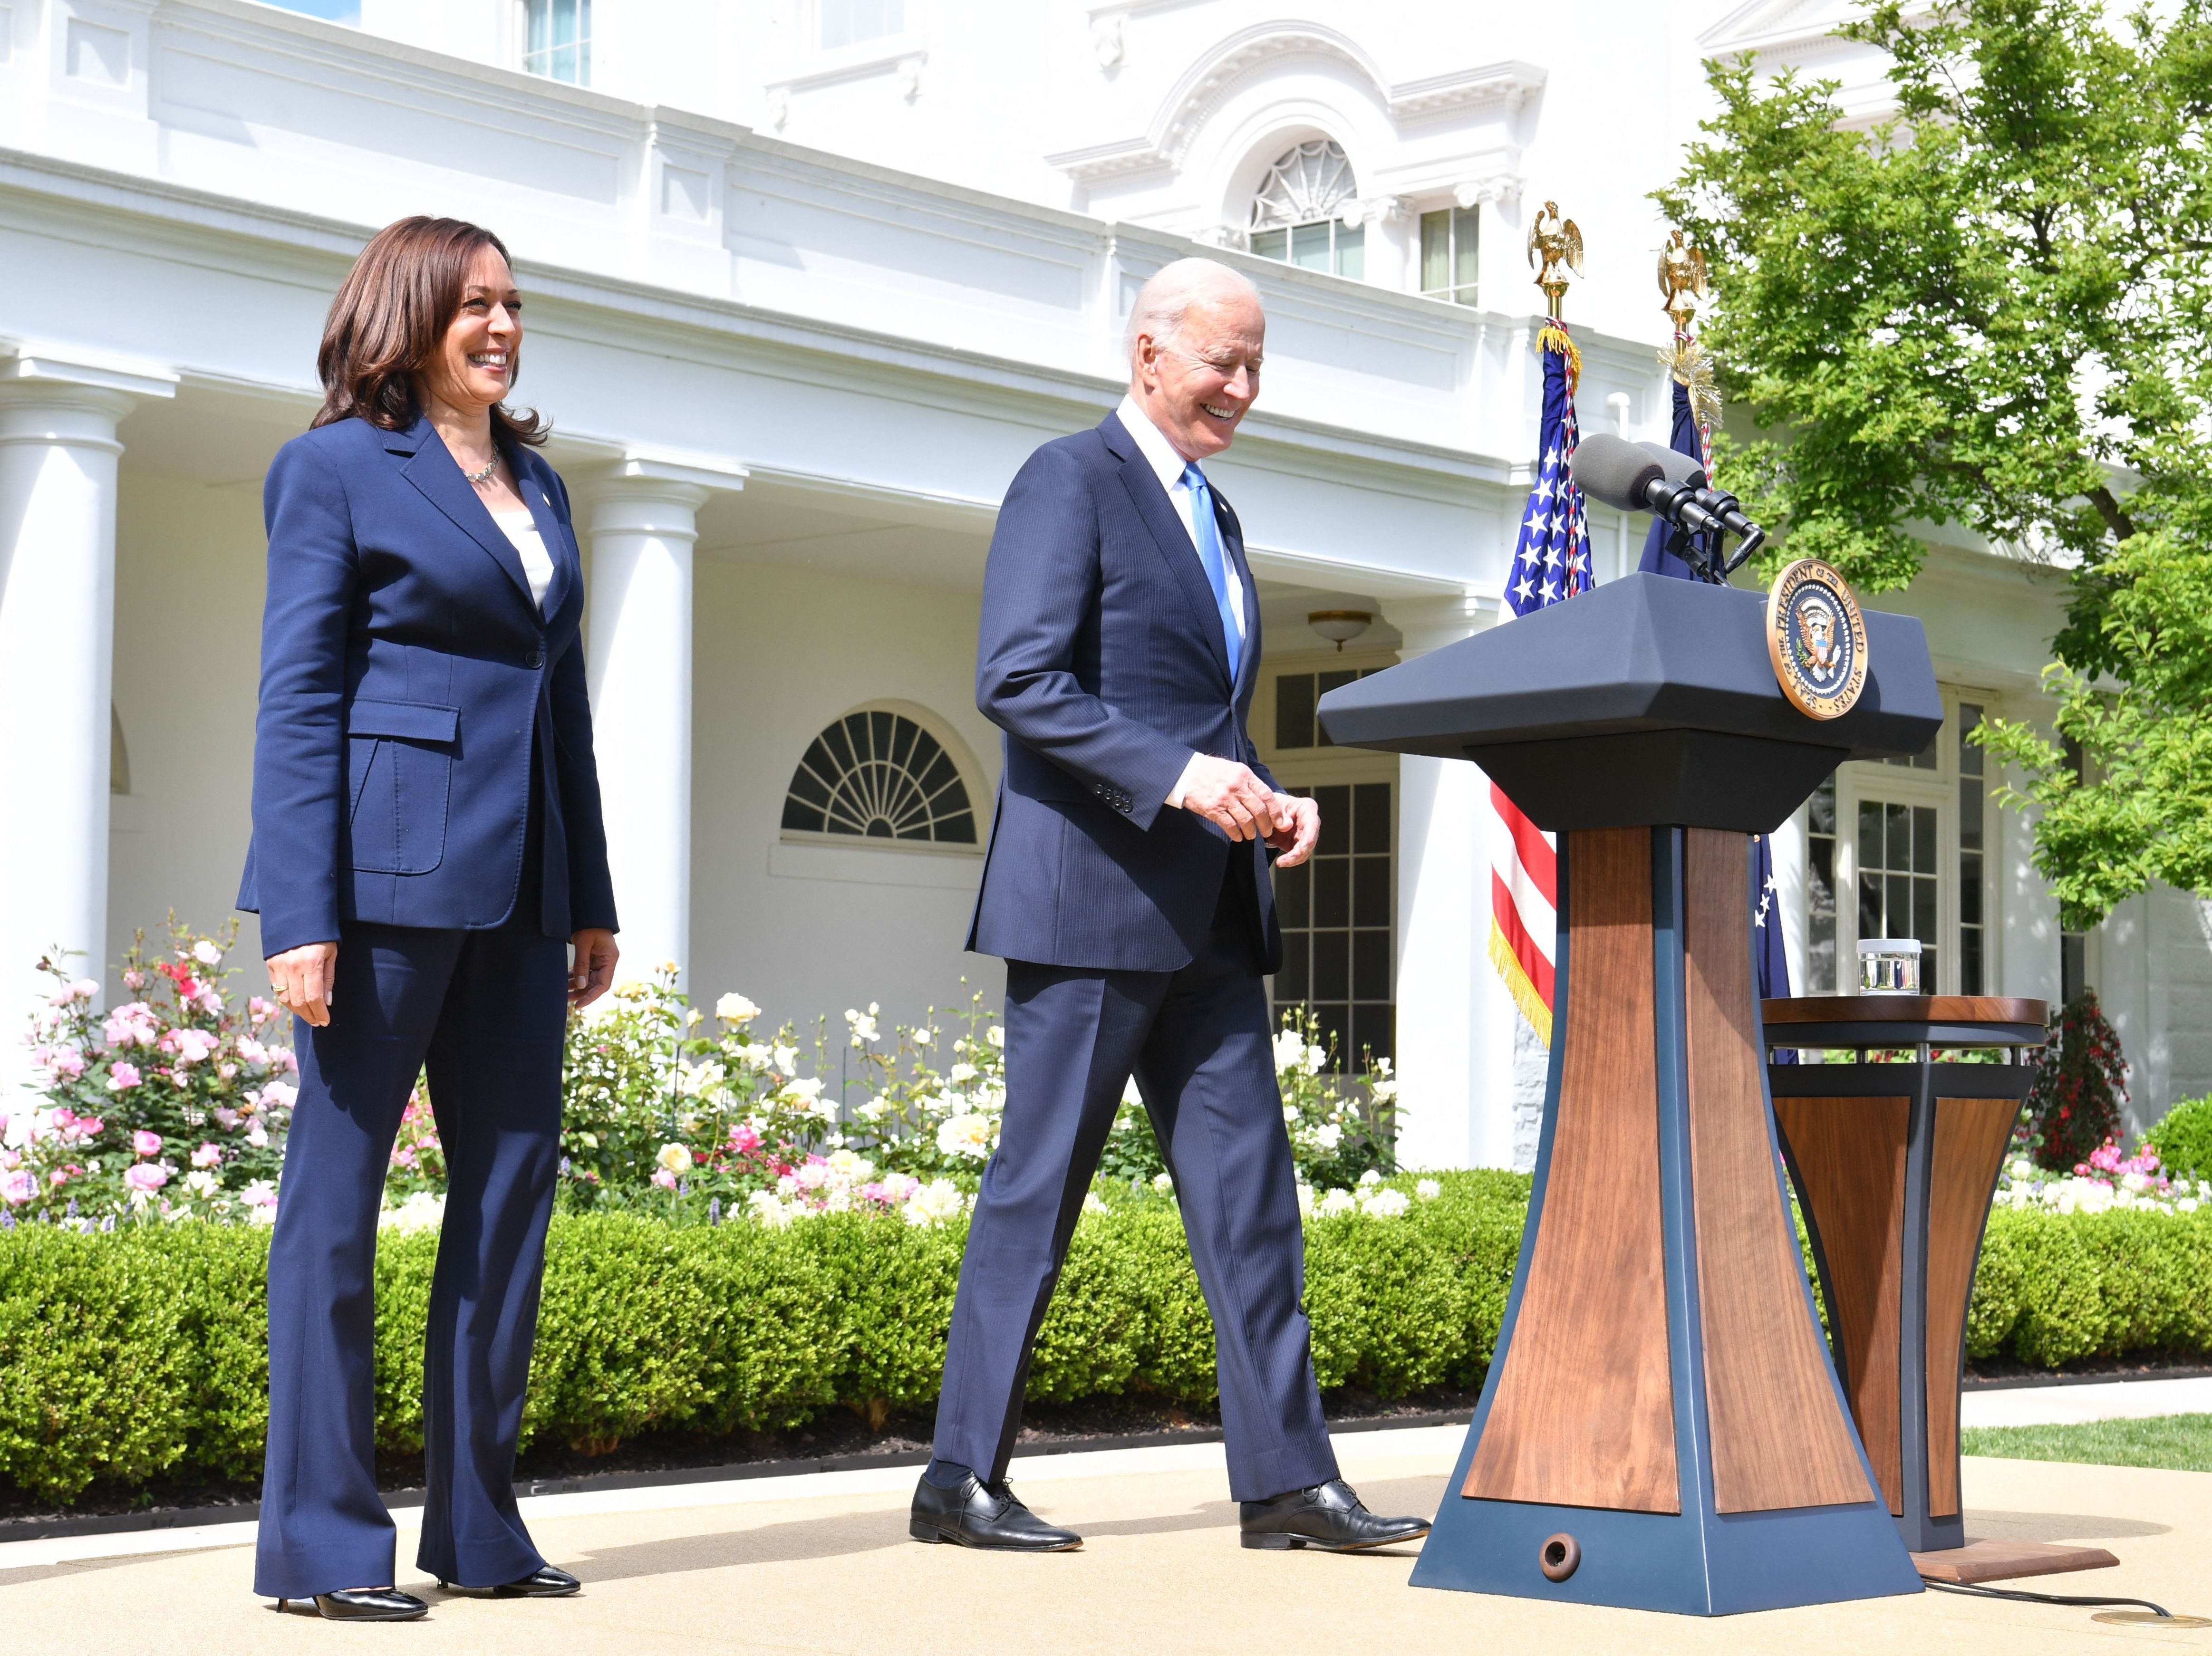 President Biden arrives with Vice President Harris to discuss the CDC's new mask guidance in the Rose Garden of the White House on Thursday. CREDIT: Nicholas Kamm/AFP via Getty Images